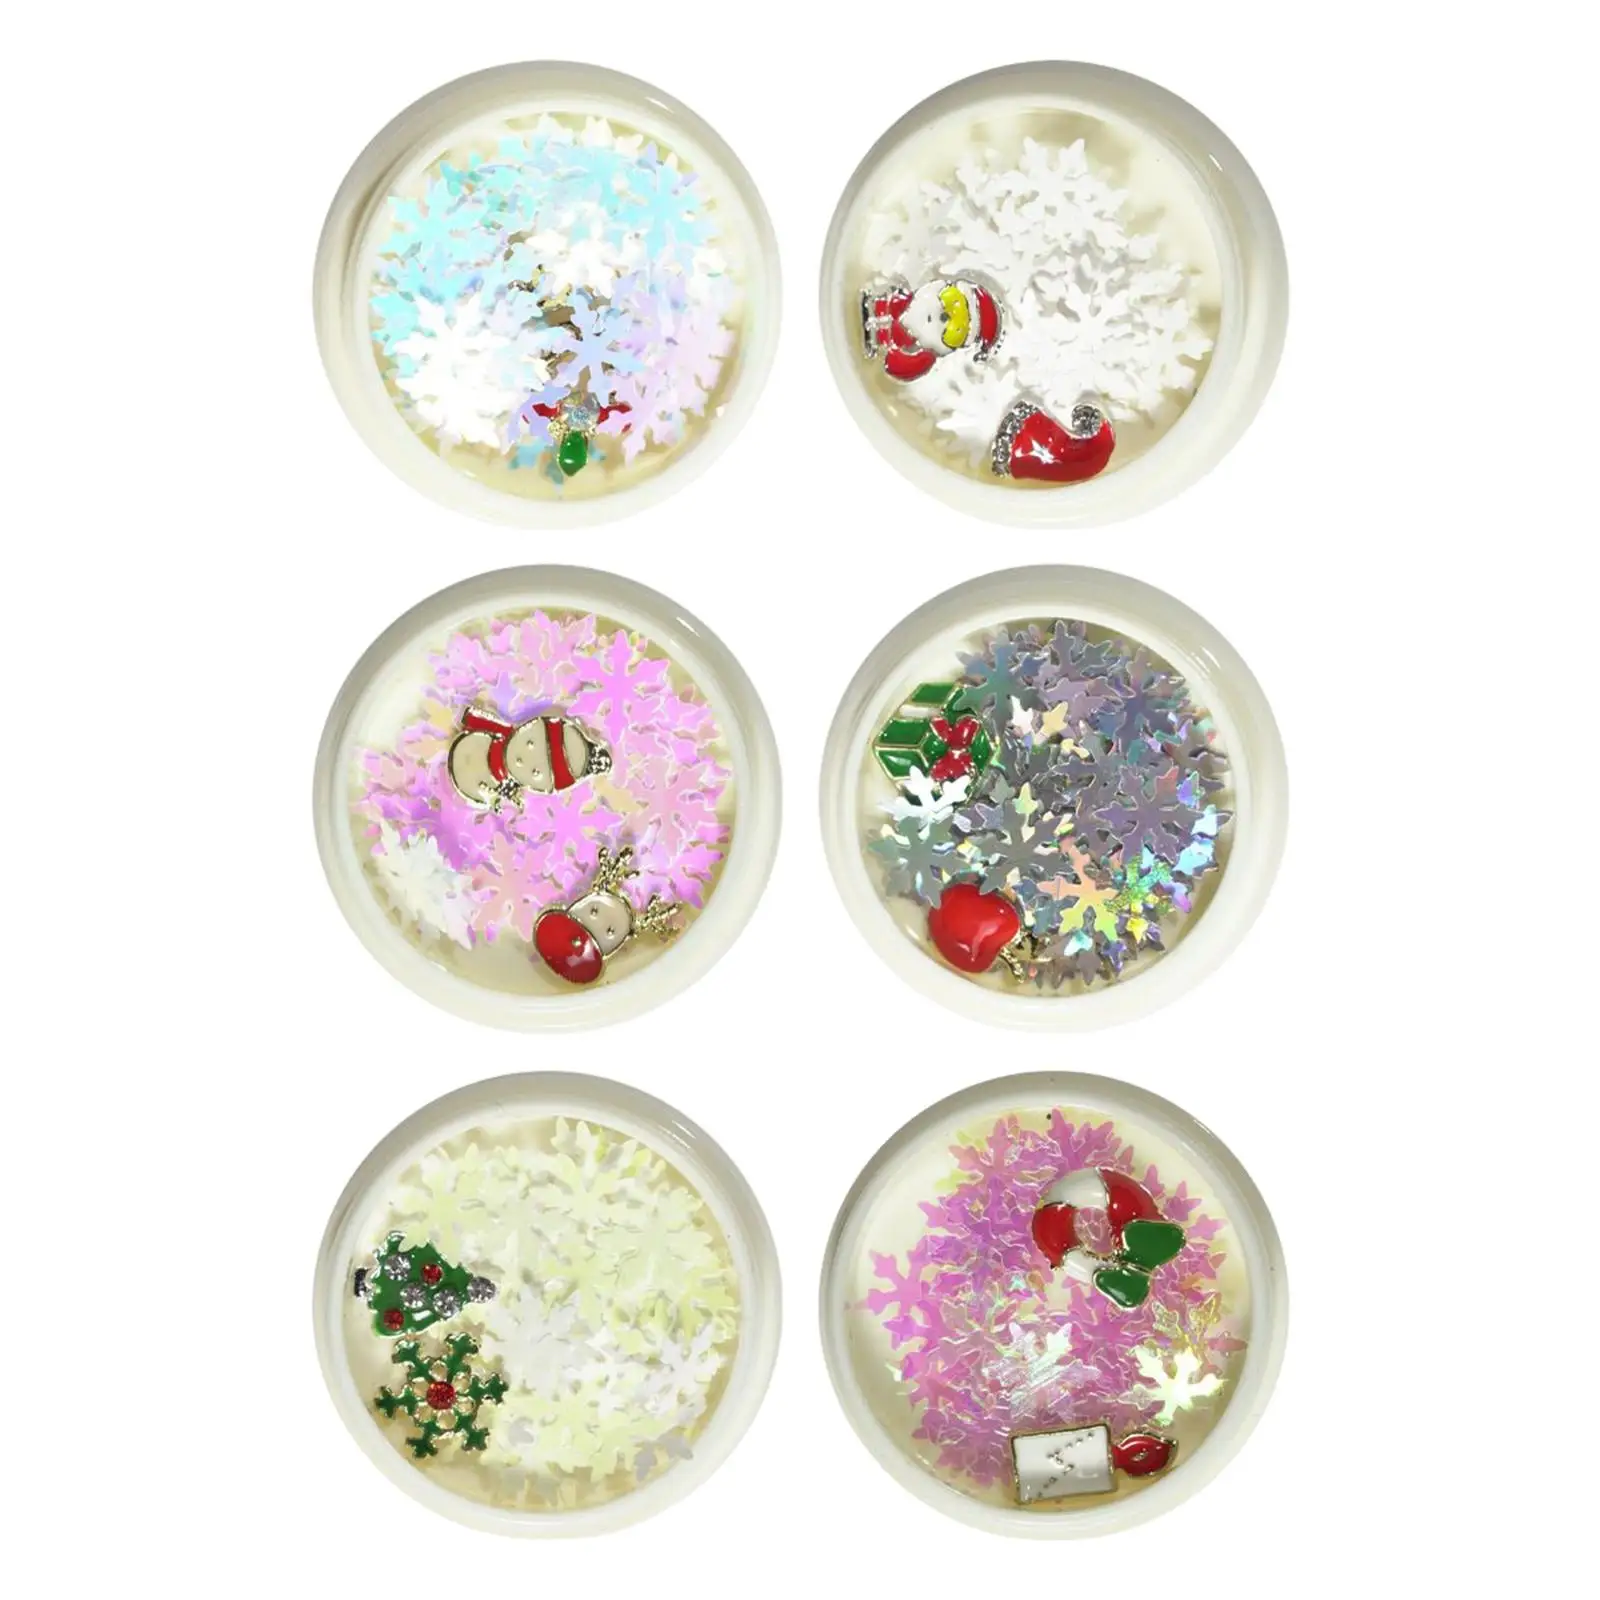 6 Colors Christmas Nail Art Sequins, Crafts Manicure DIY Snowflake Sequins Glitters Nail Art Decoration Salon Home Use